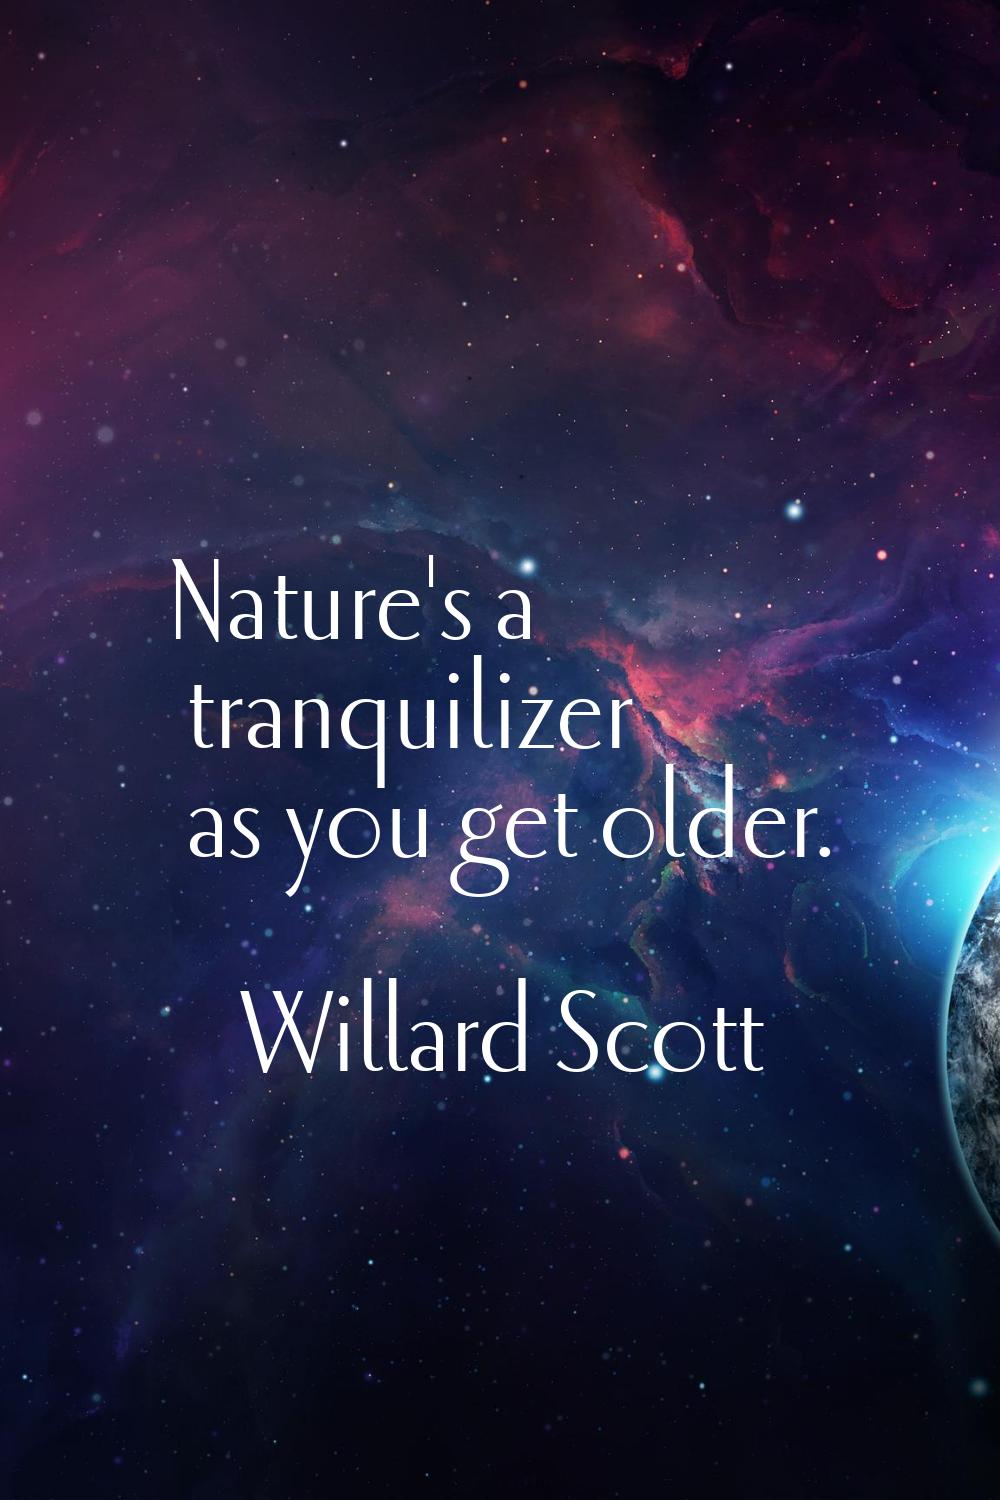 Nature's a tranquilizer as you get older.